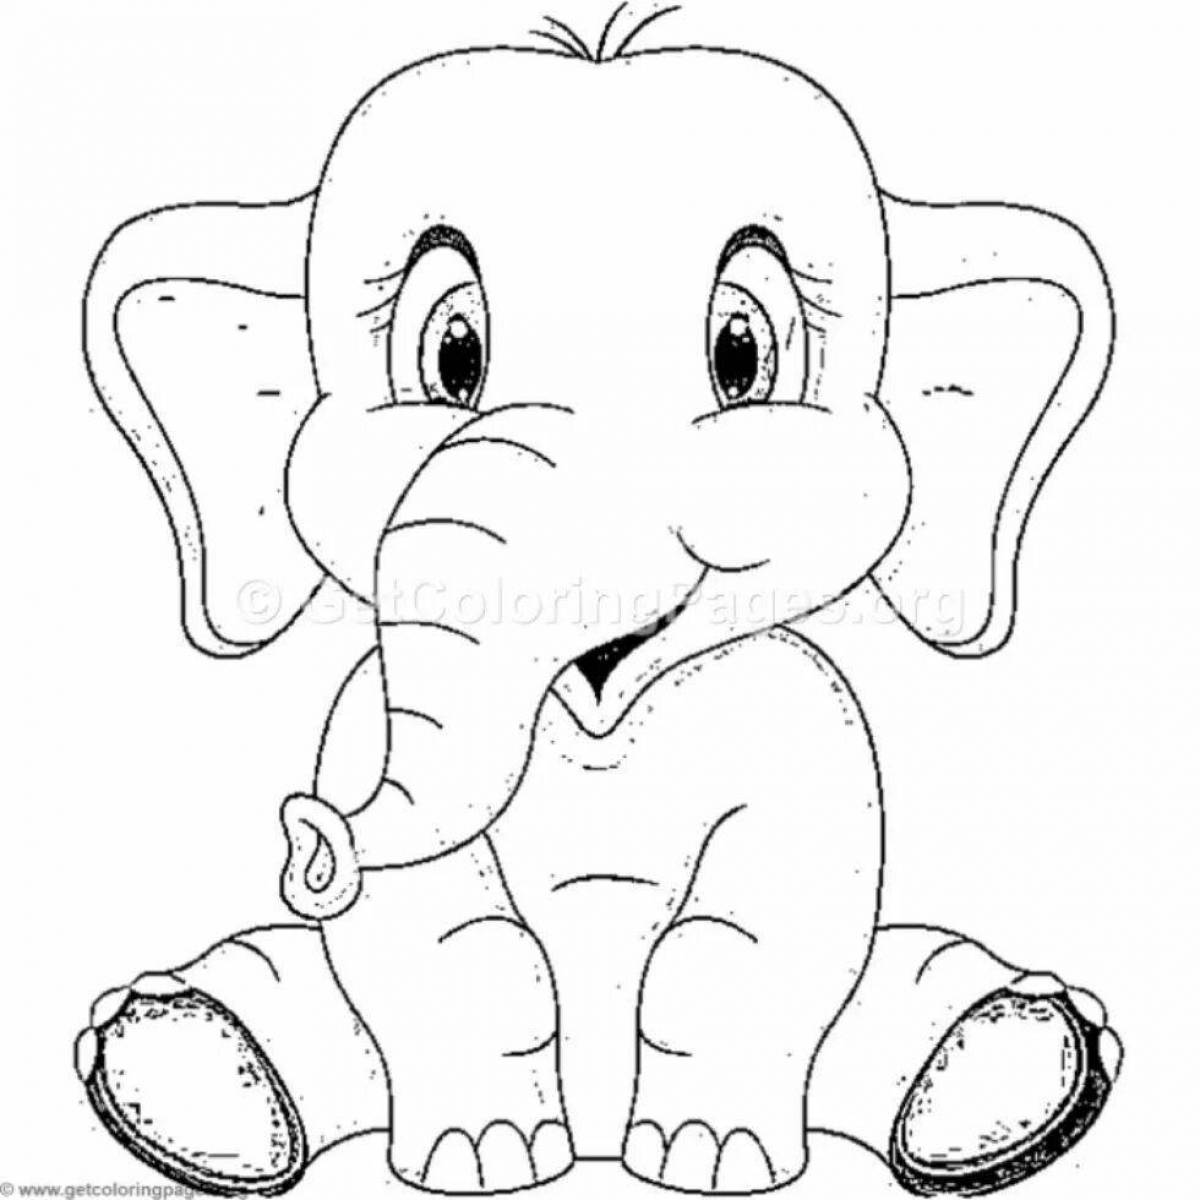 Colourful coloring elephant for children 3-4 years old